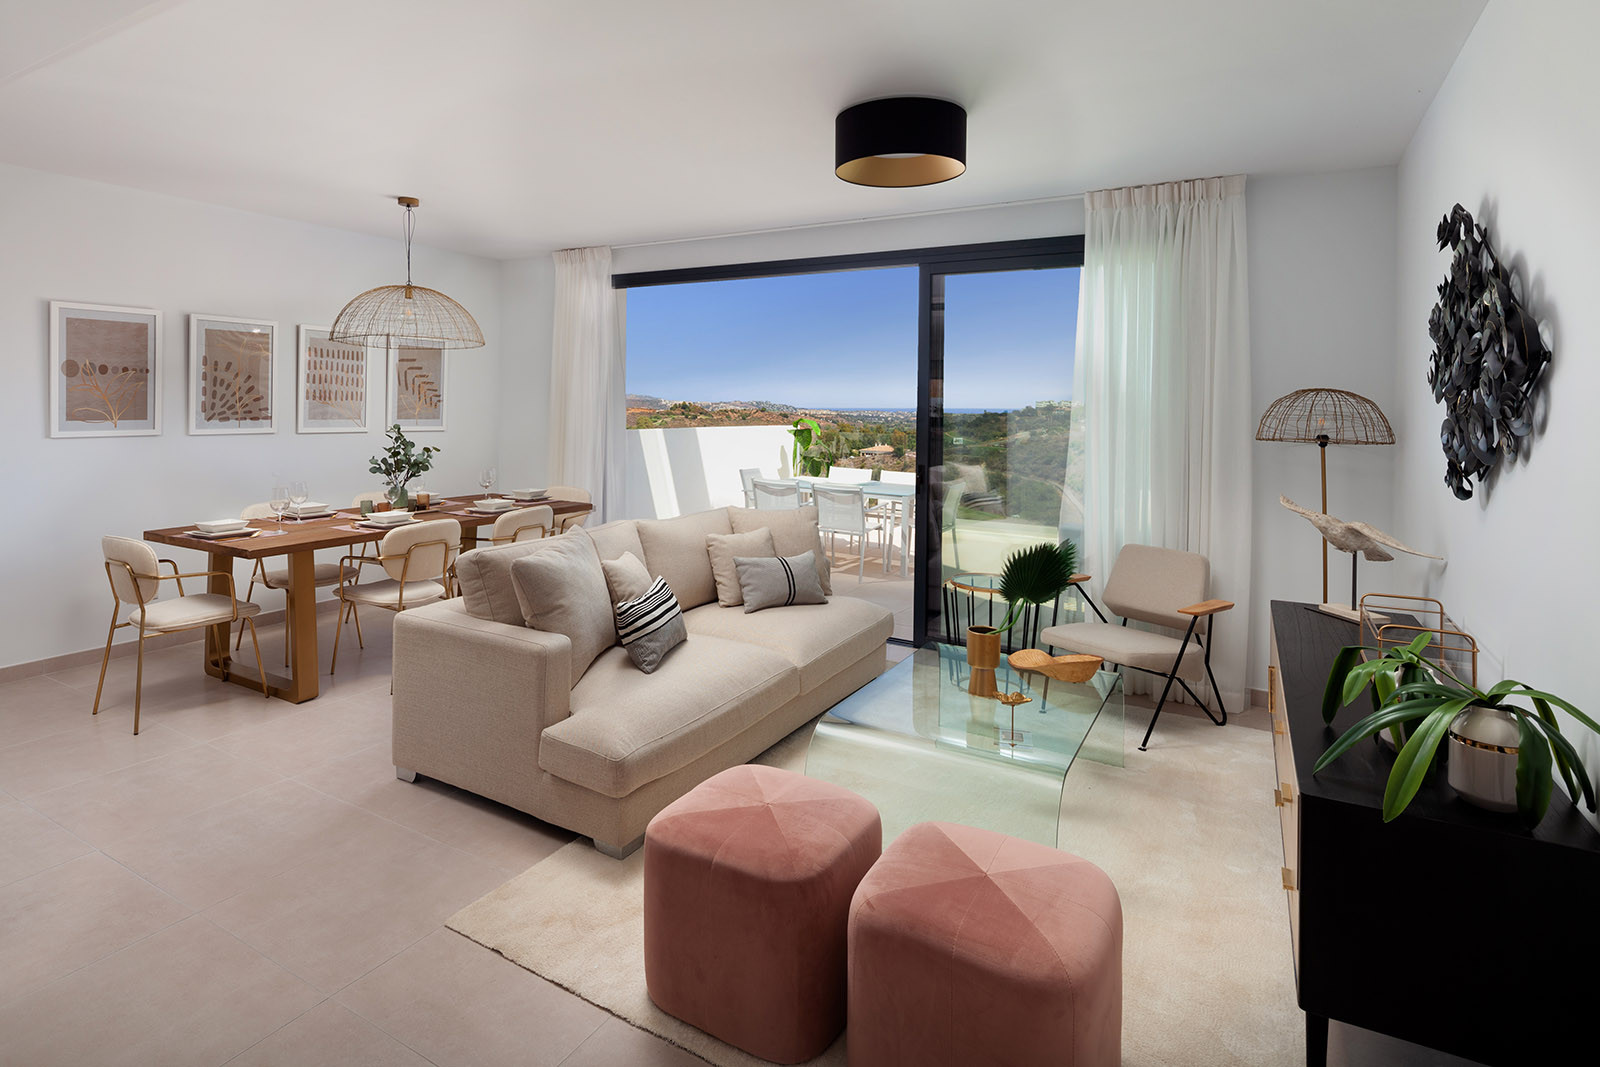 New development of 54 contemporary apartments within golf resort in Mijas Costa